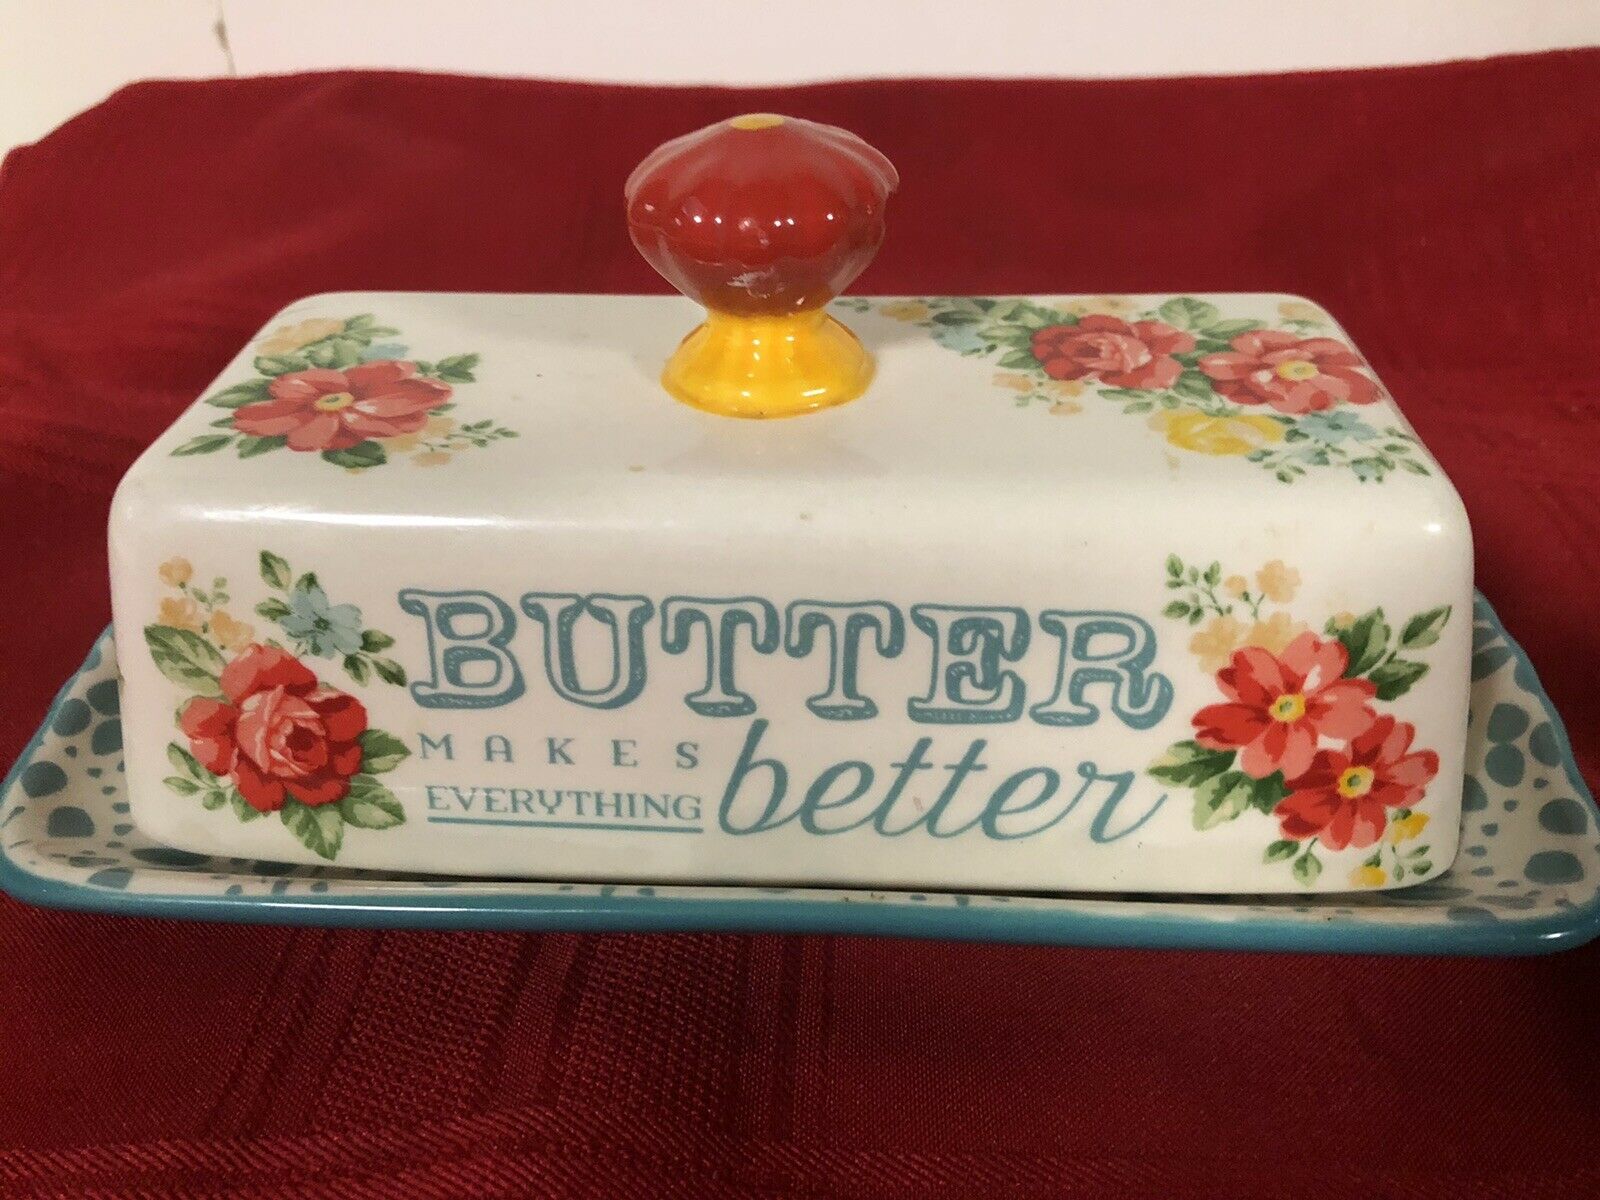 Beautiful Pioneer Woman Stoneware Butter Dish Makes Everything Better Roses